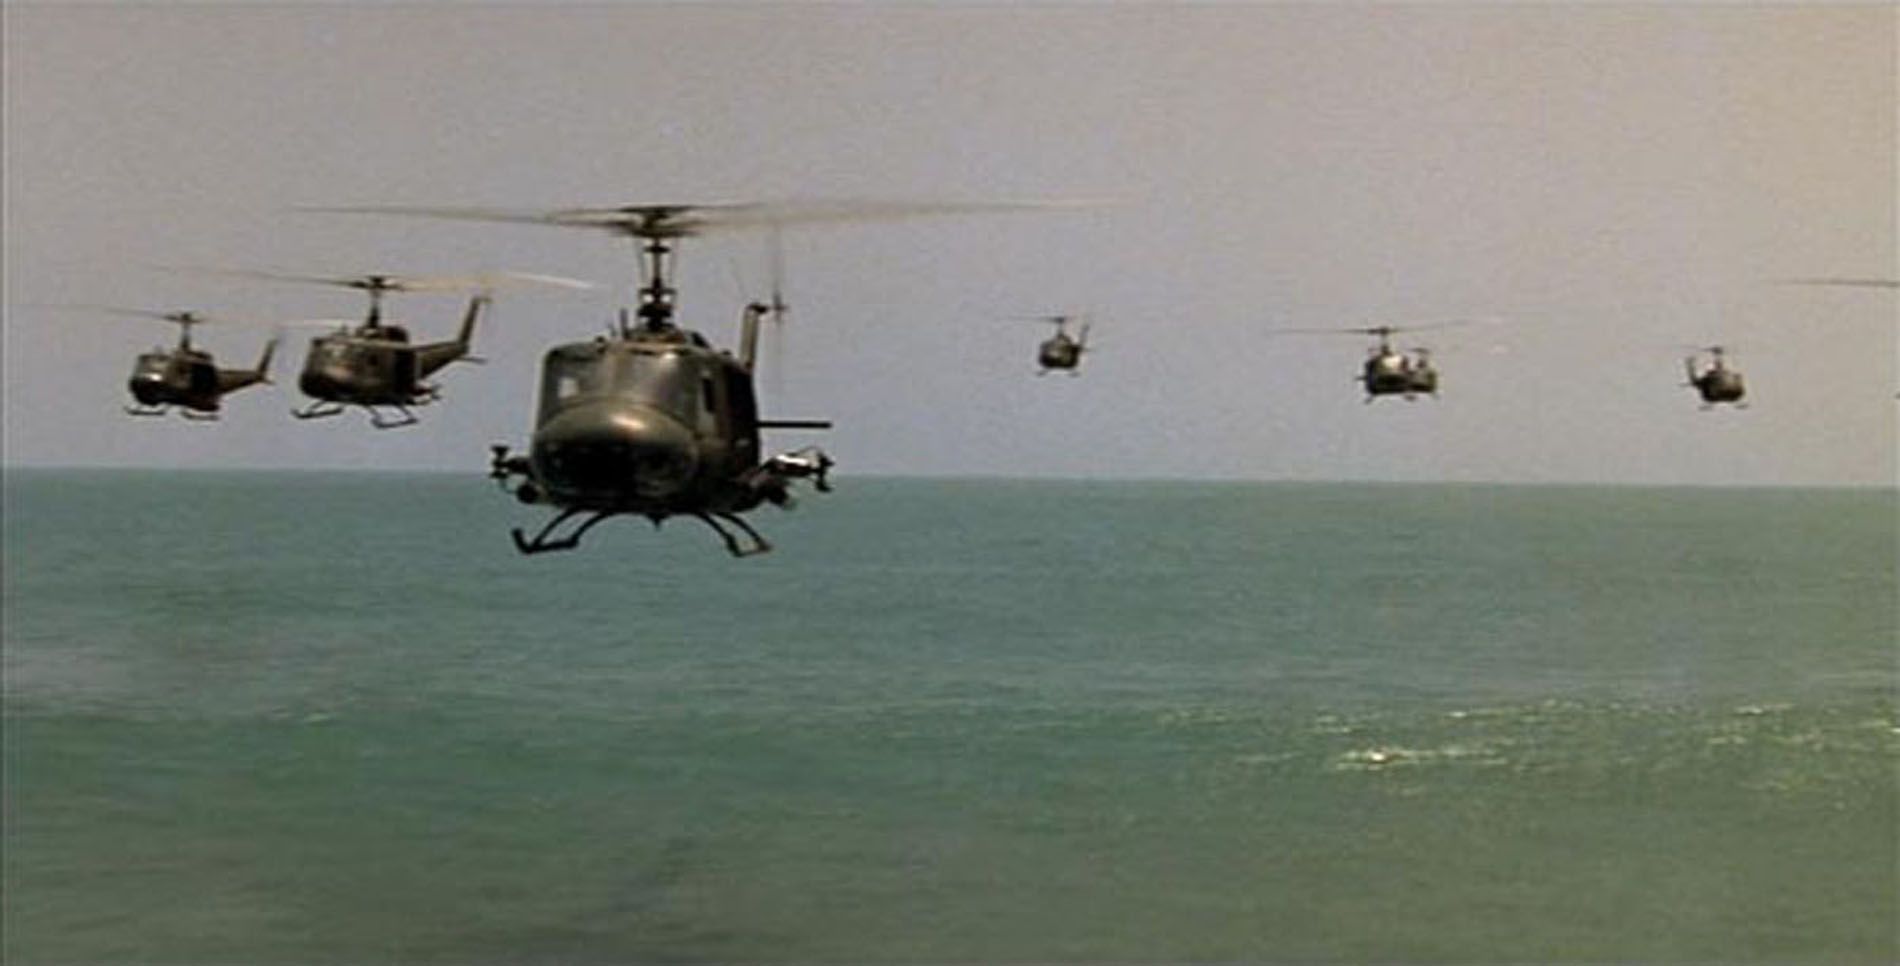 Movies helicopters apocalypse now vehicles uh